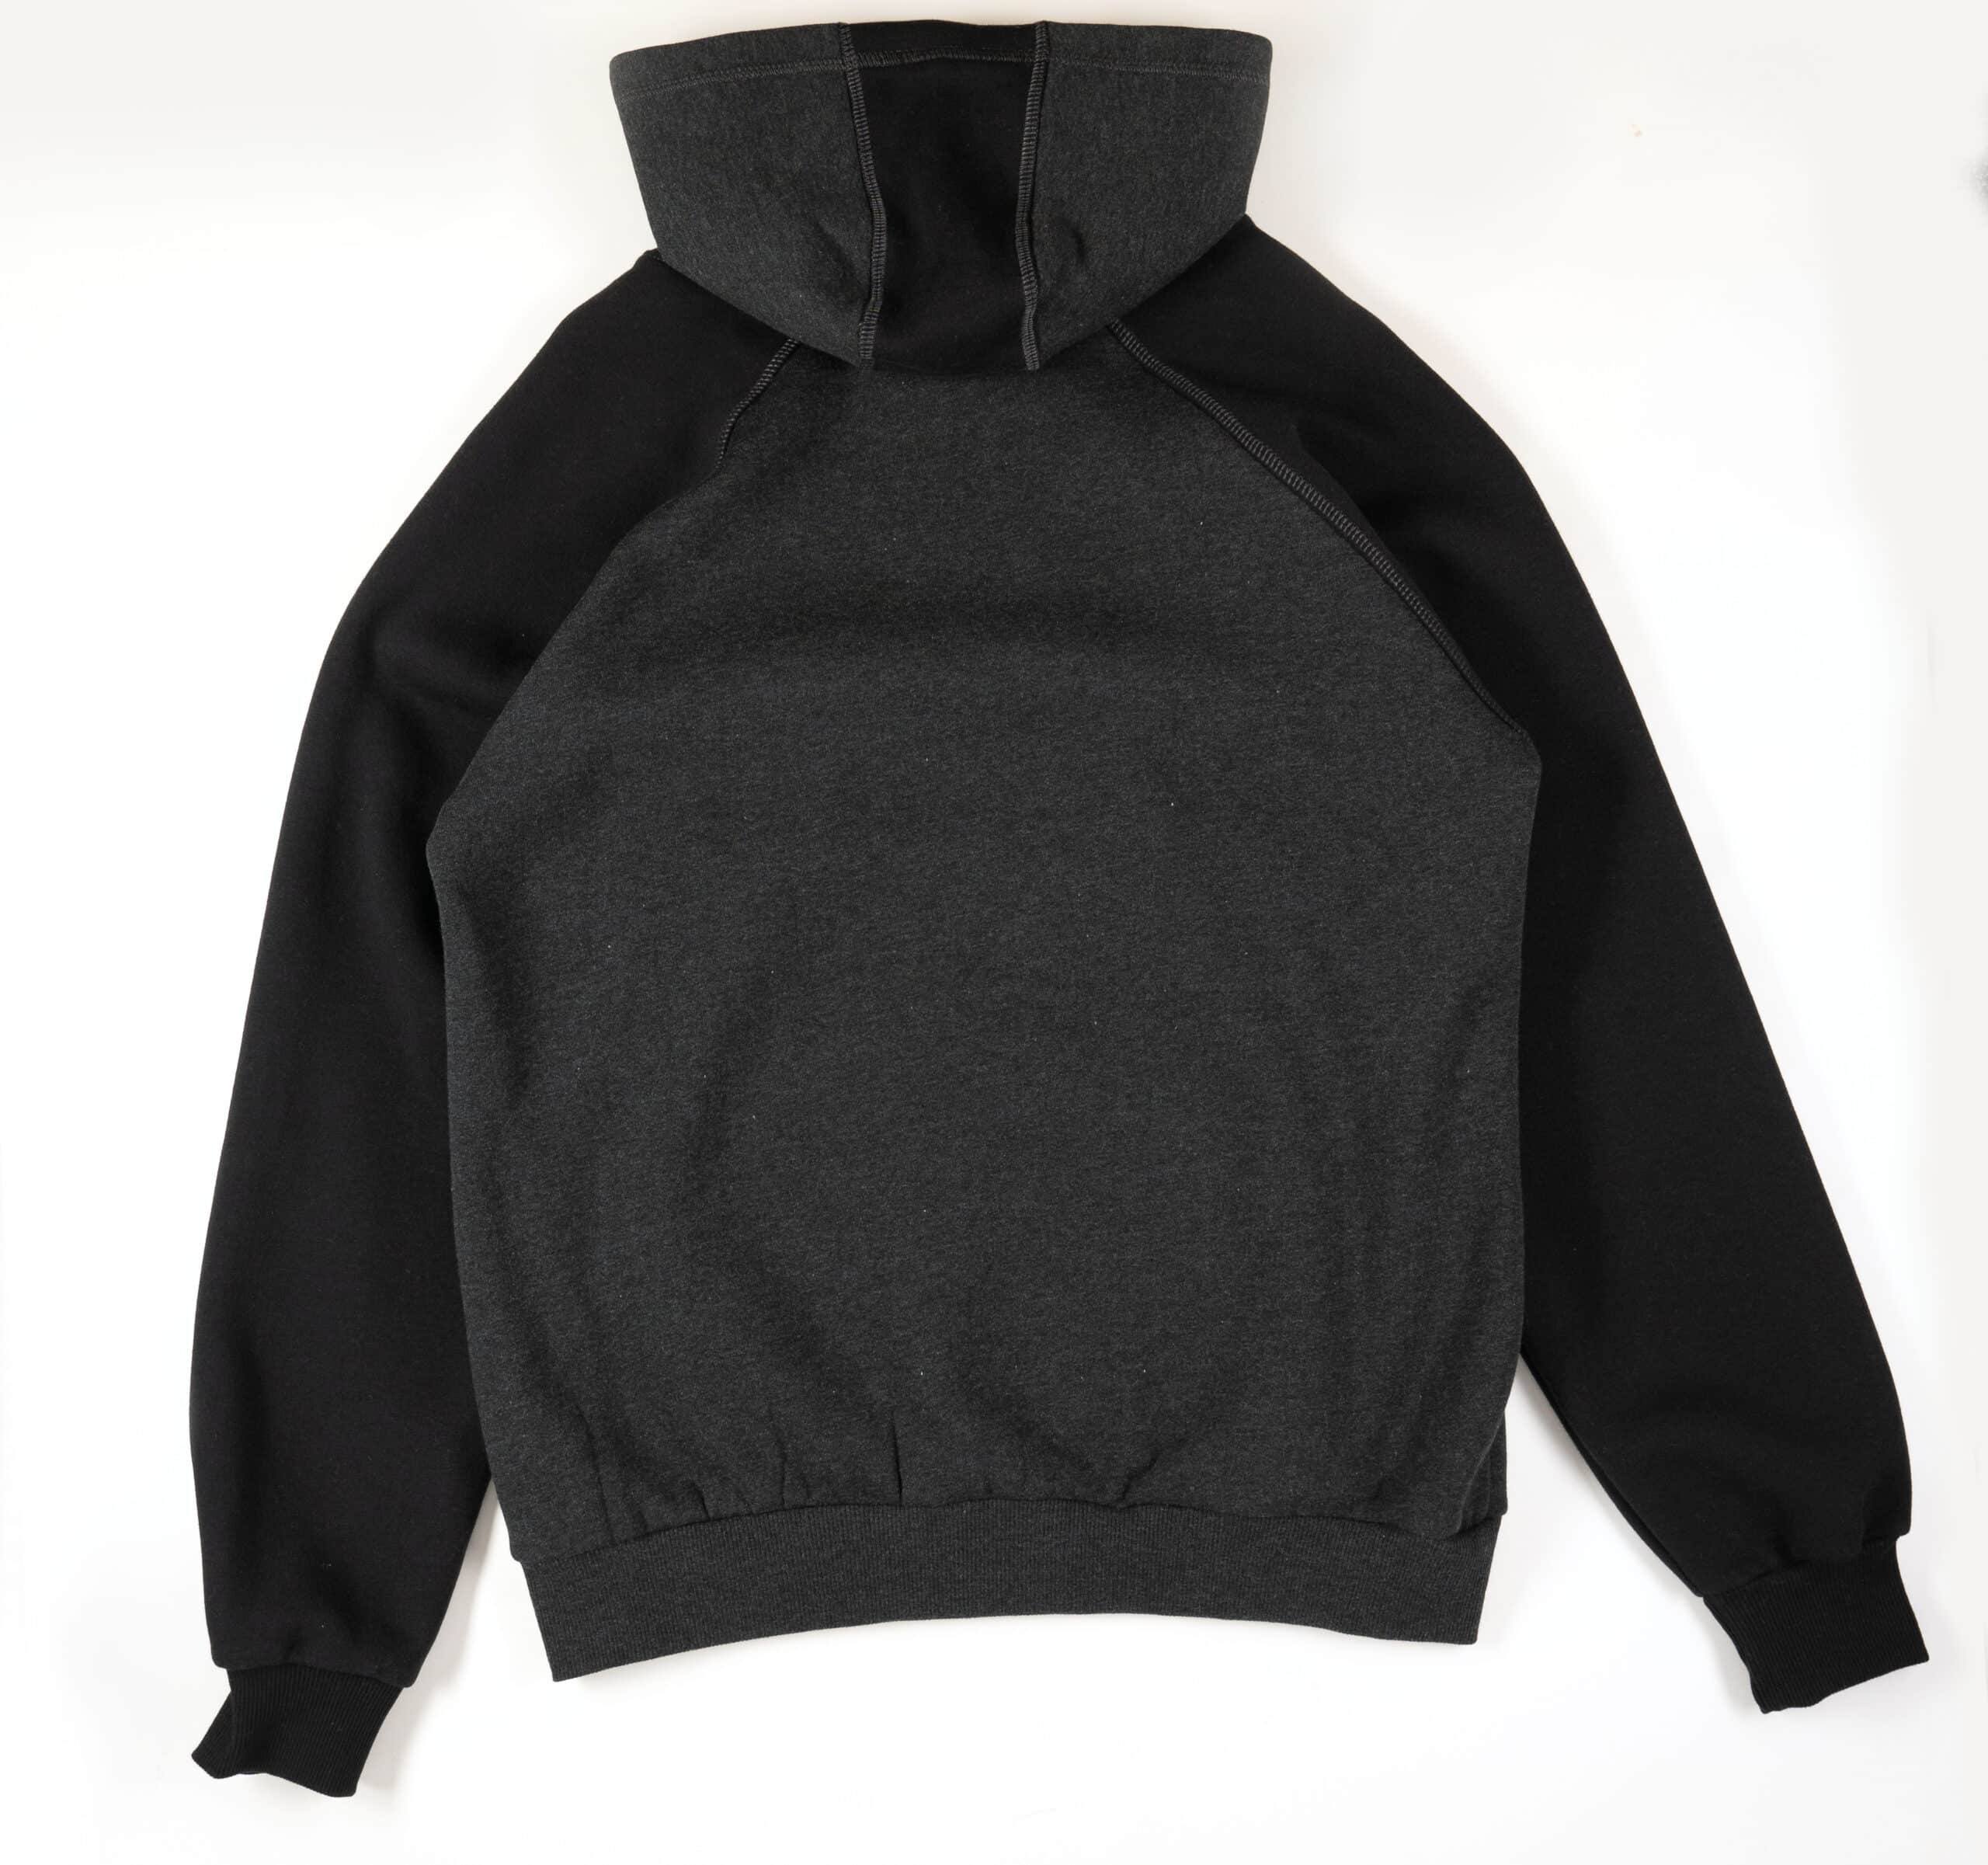 USW Two-Toned Charcoal Hoodie - USW Steelworker Store